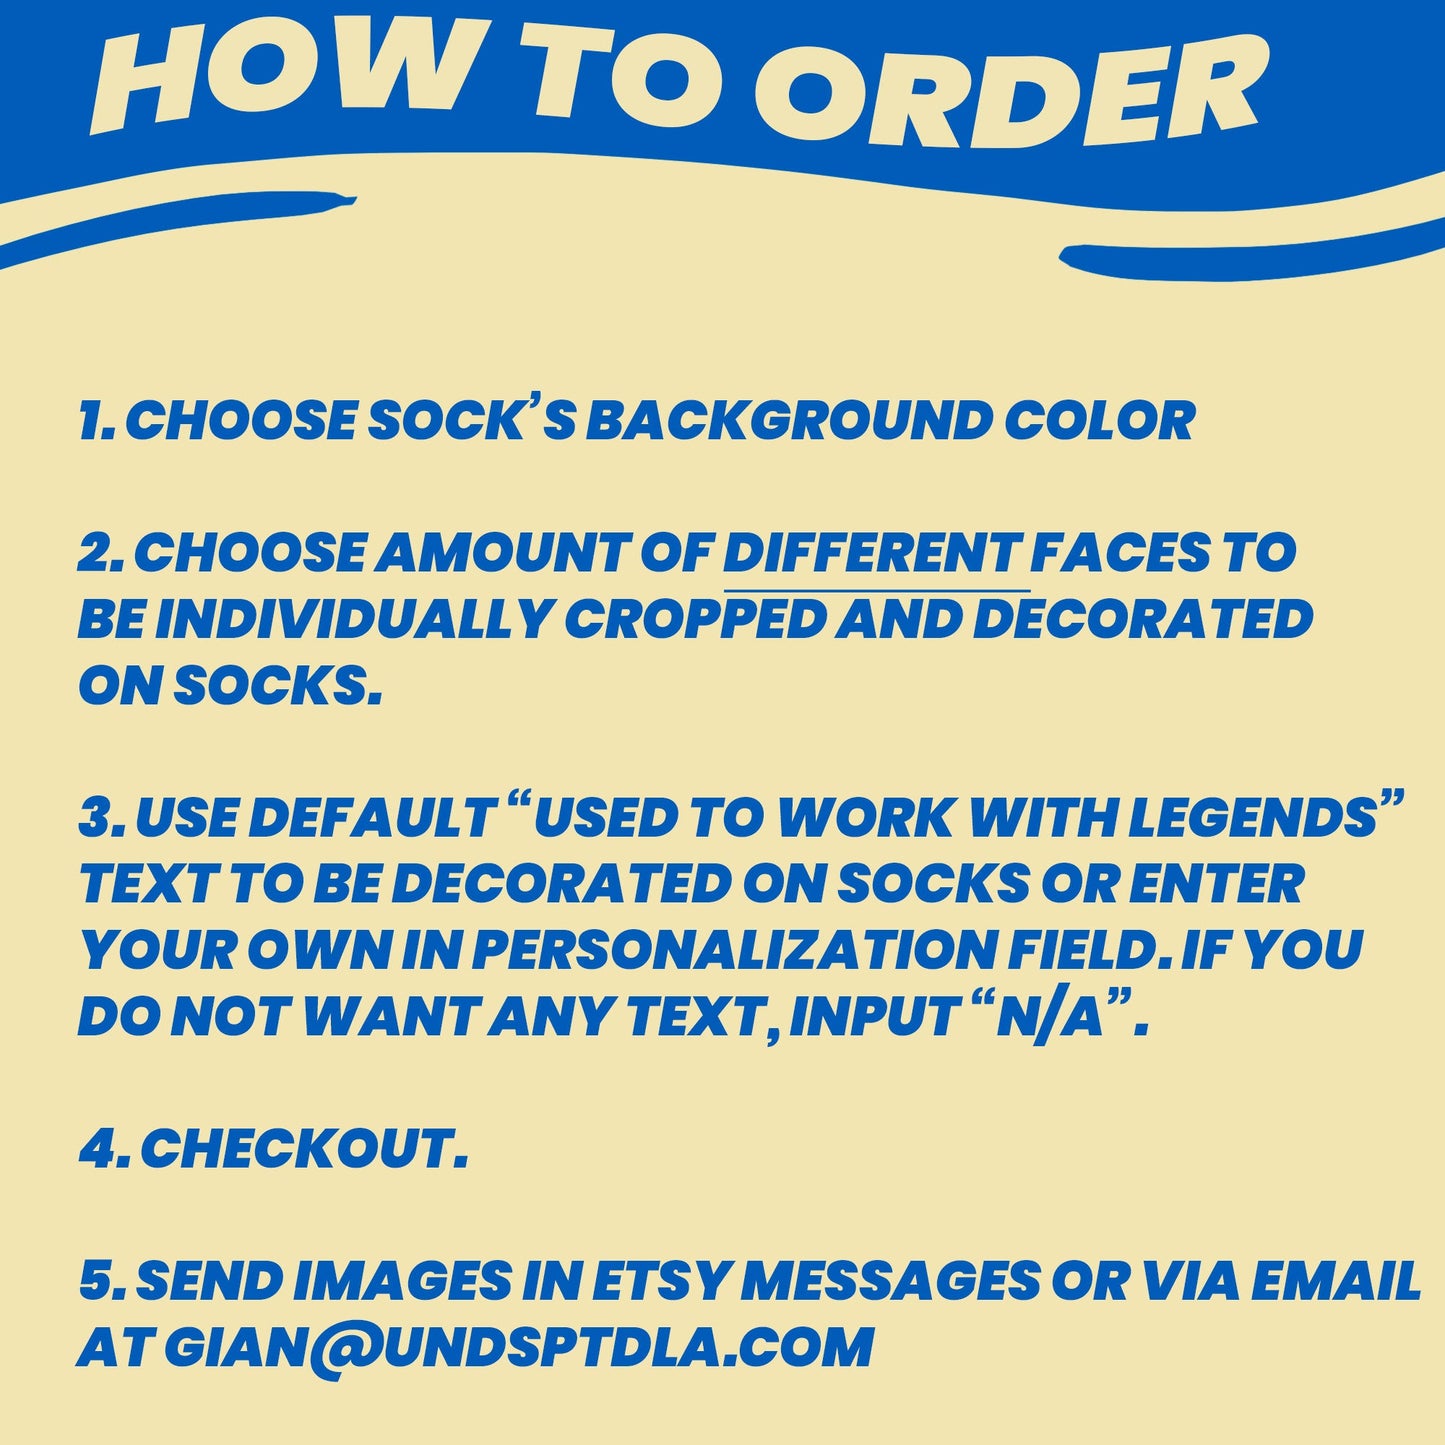 instructions on how to order the socks